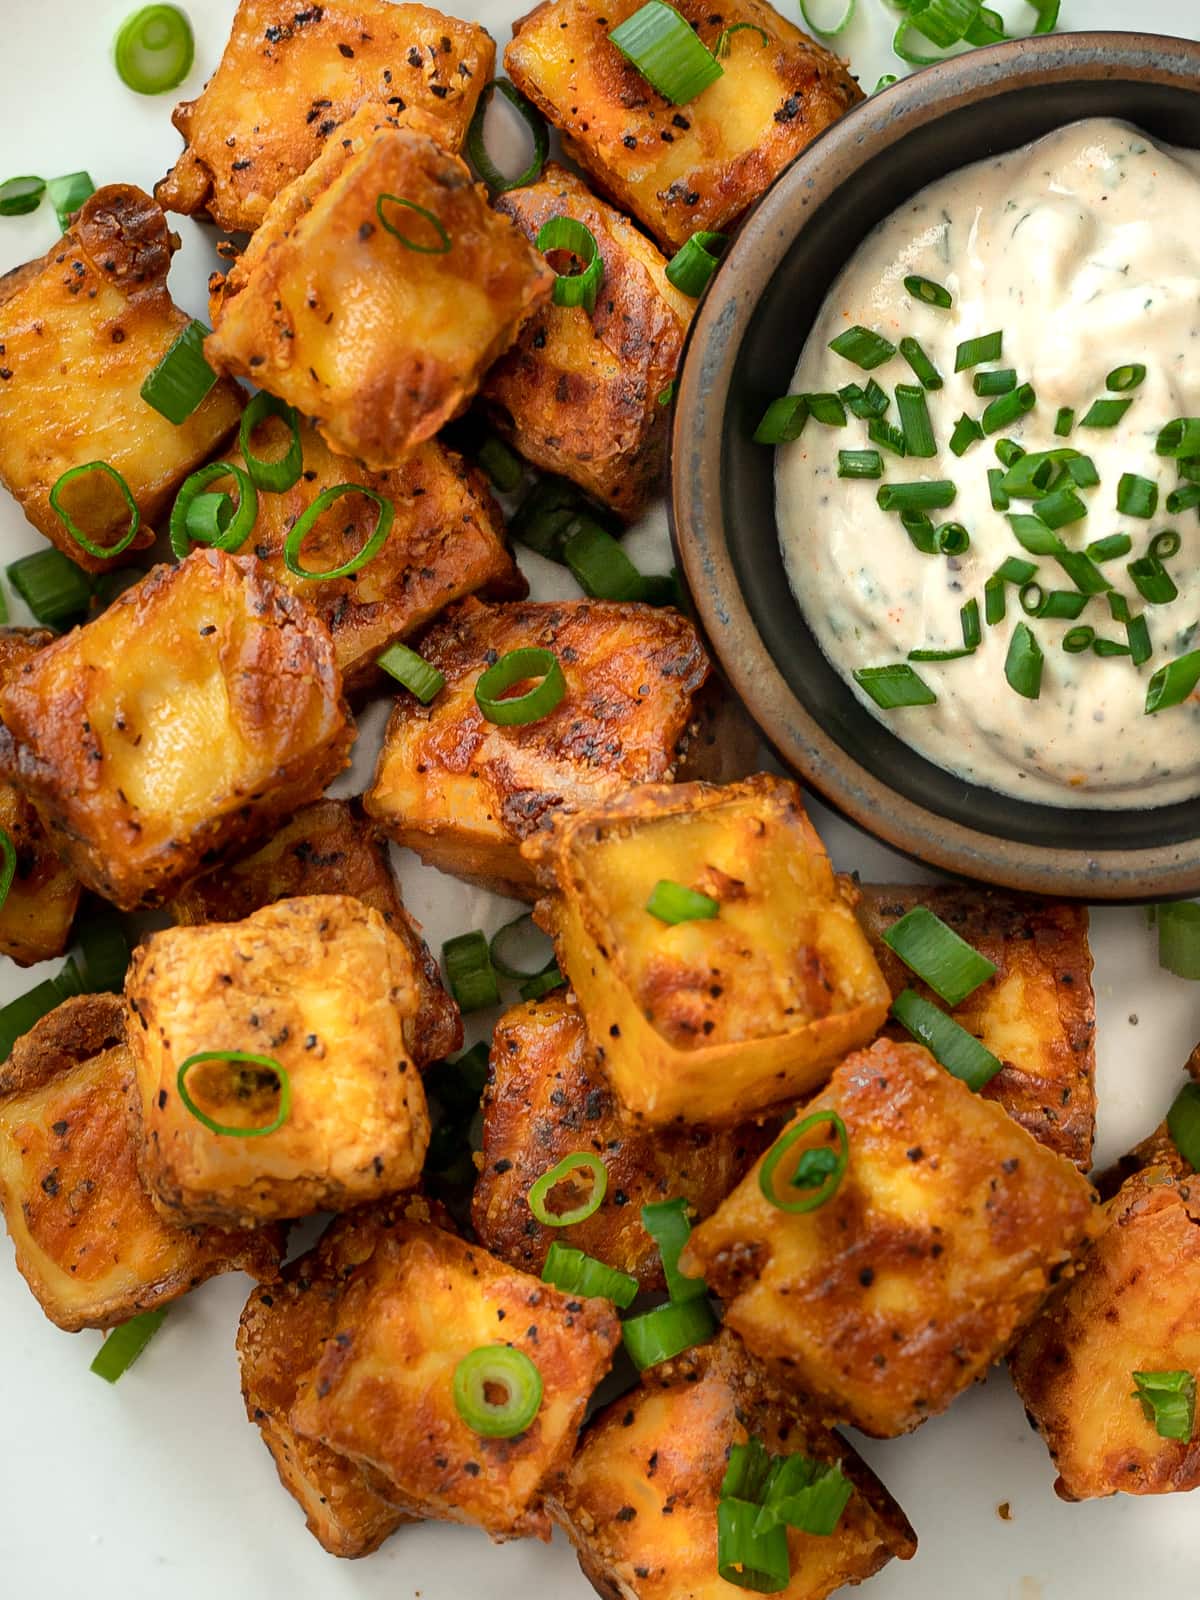 Plateful of crispy baked tofu cubes and bowlful of ranch dressing.